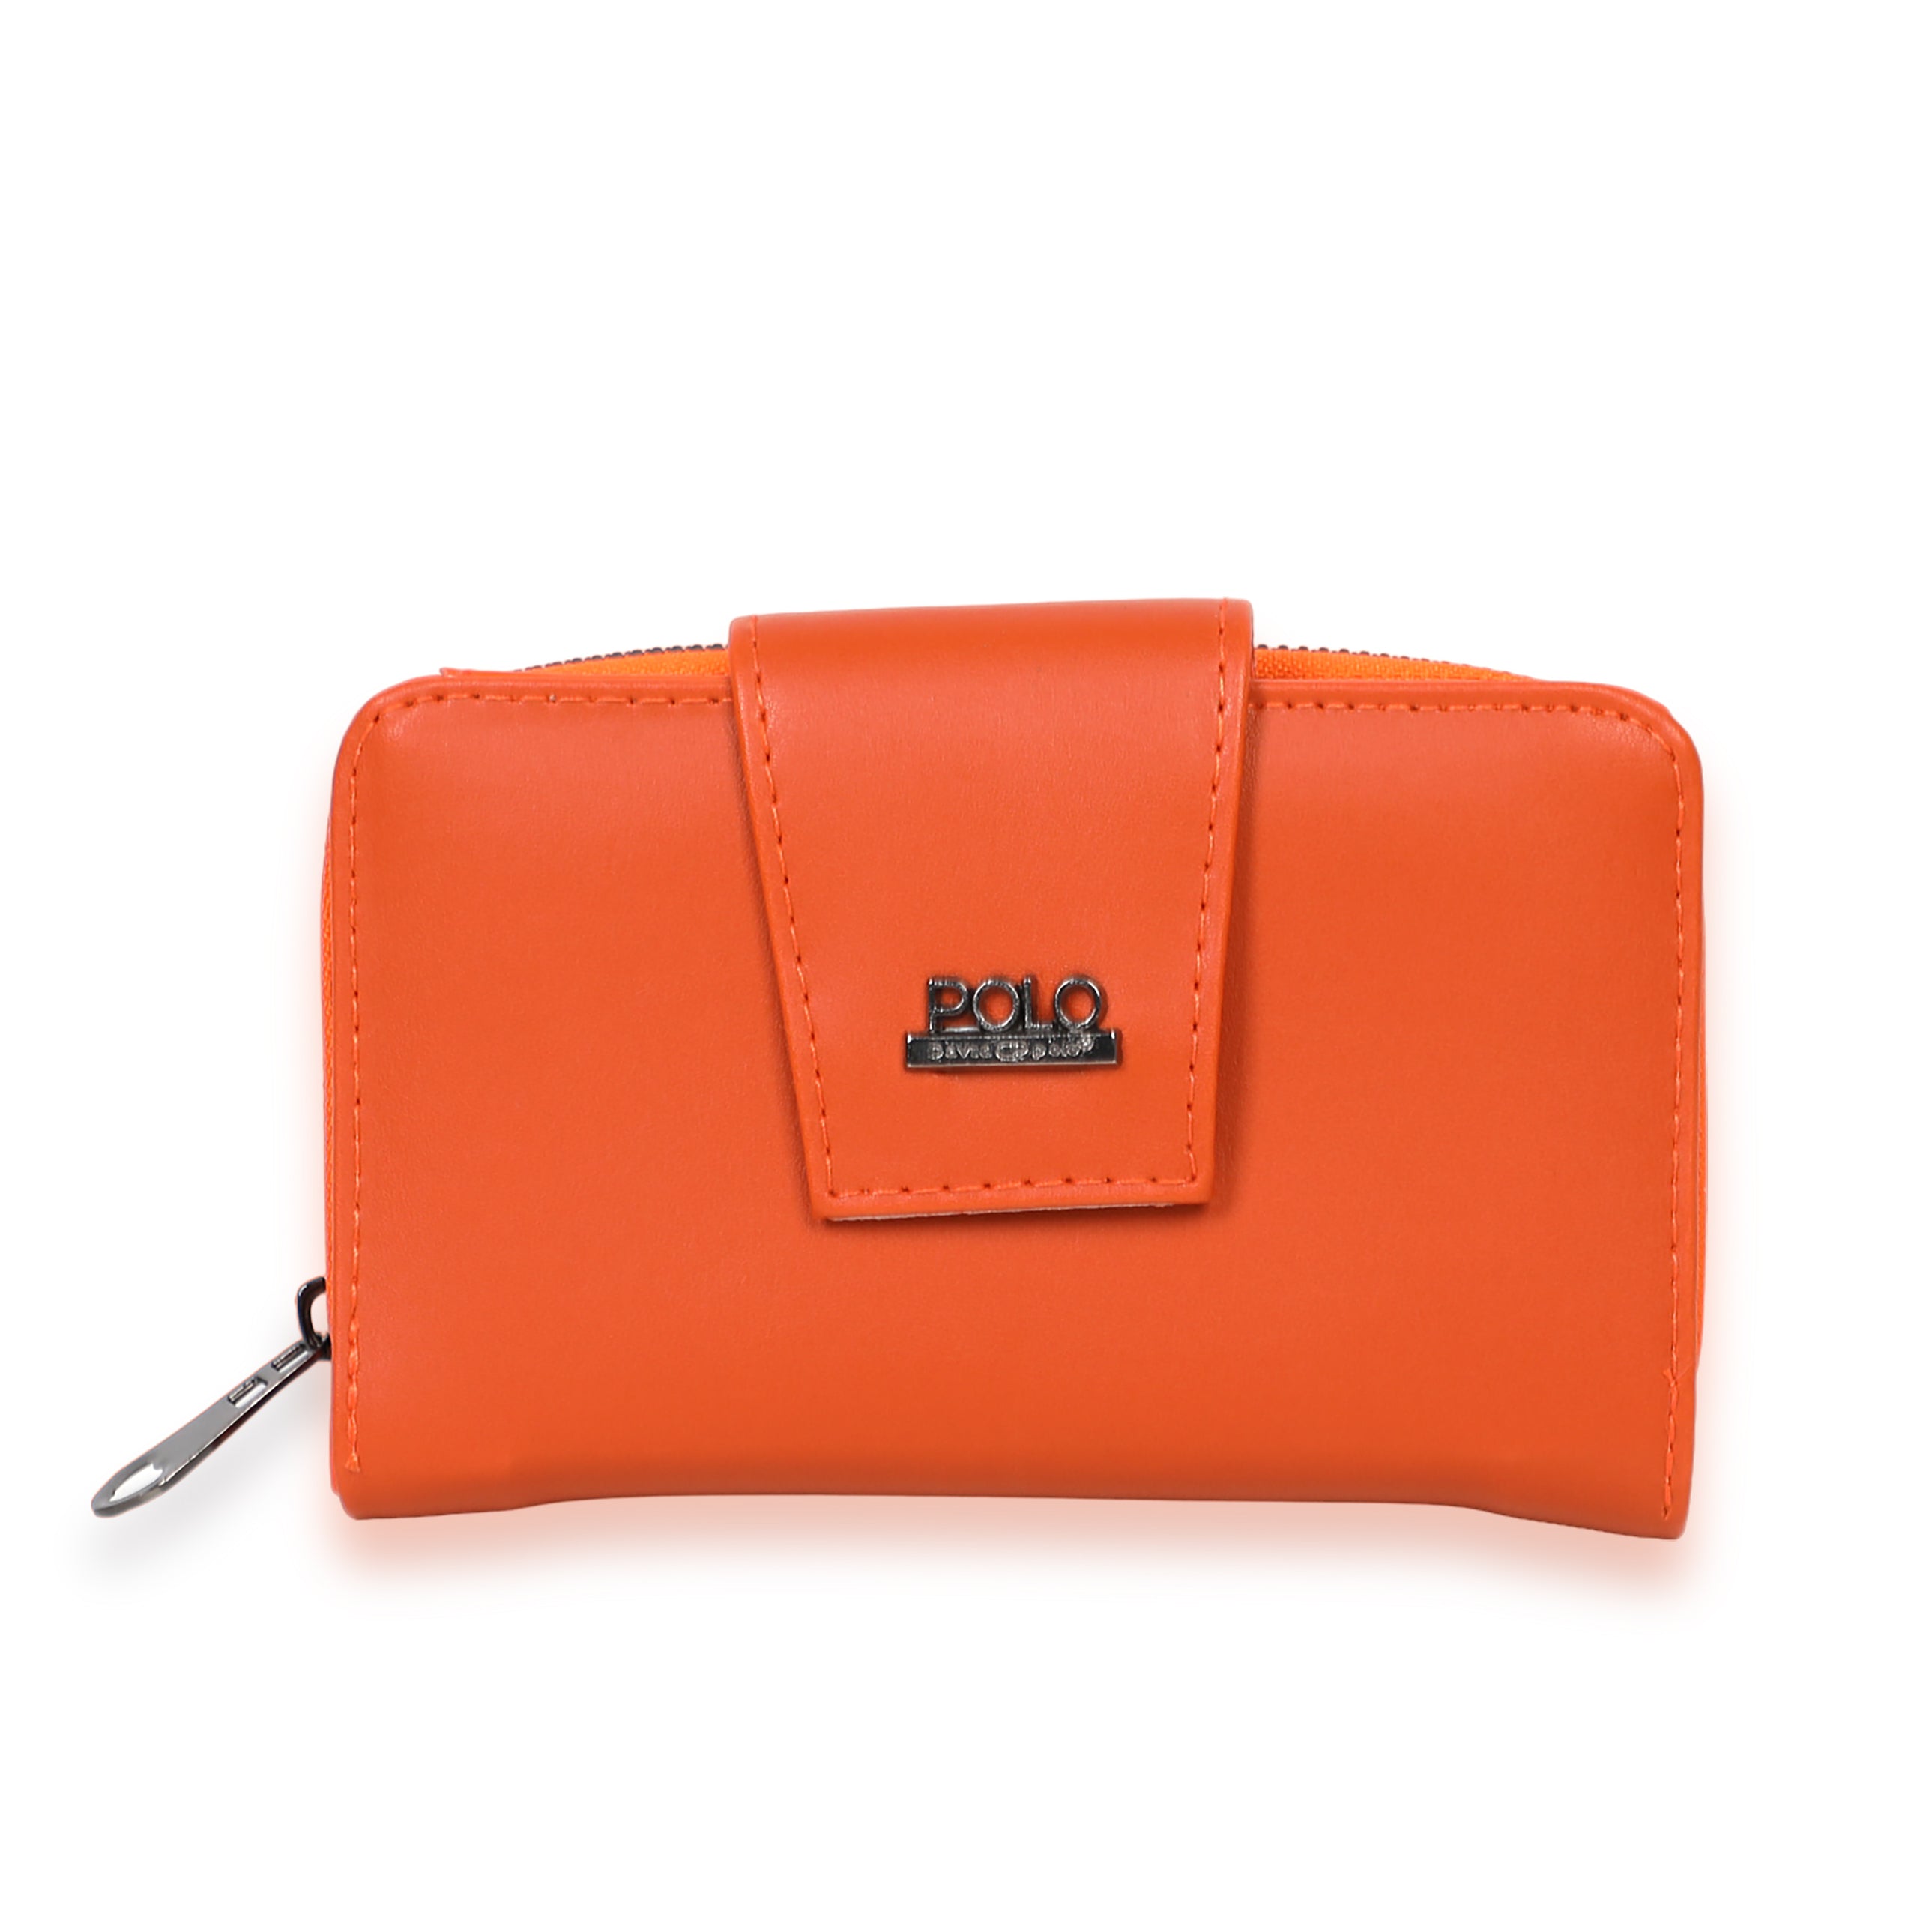 Women Orange Wallet With Several Layers Design